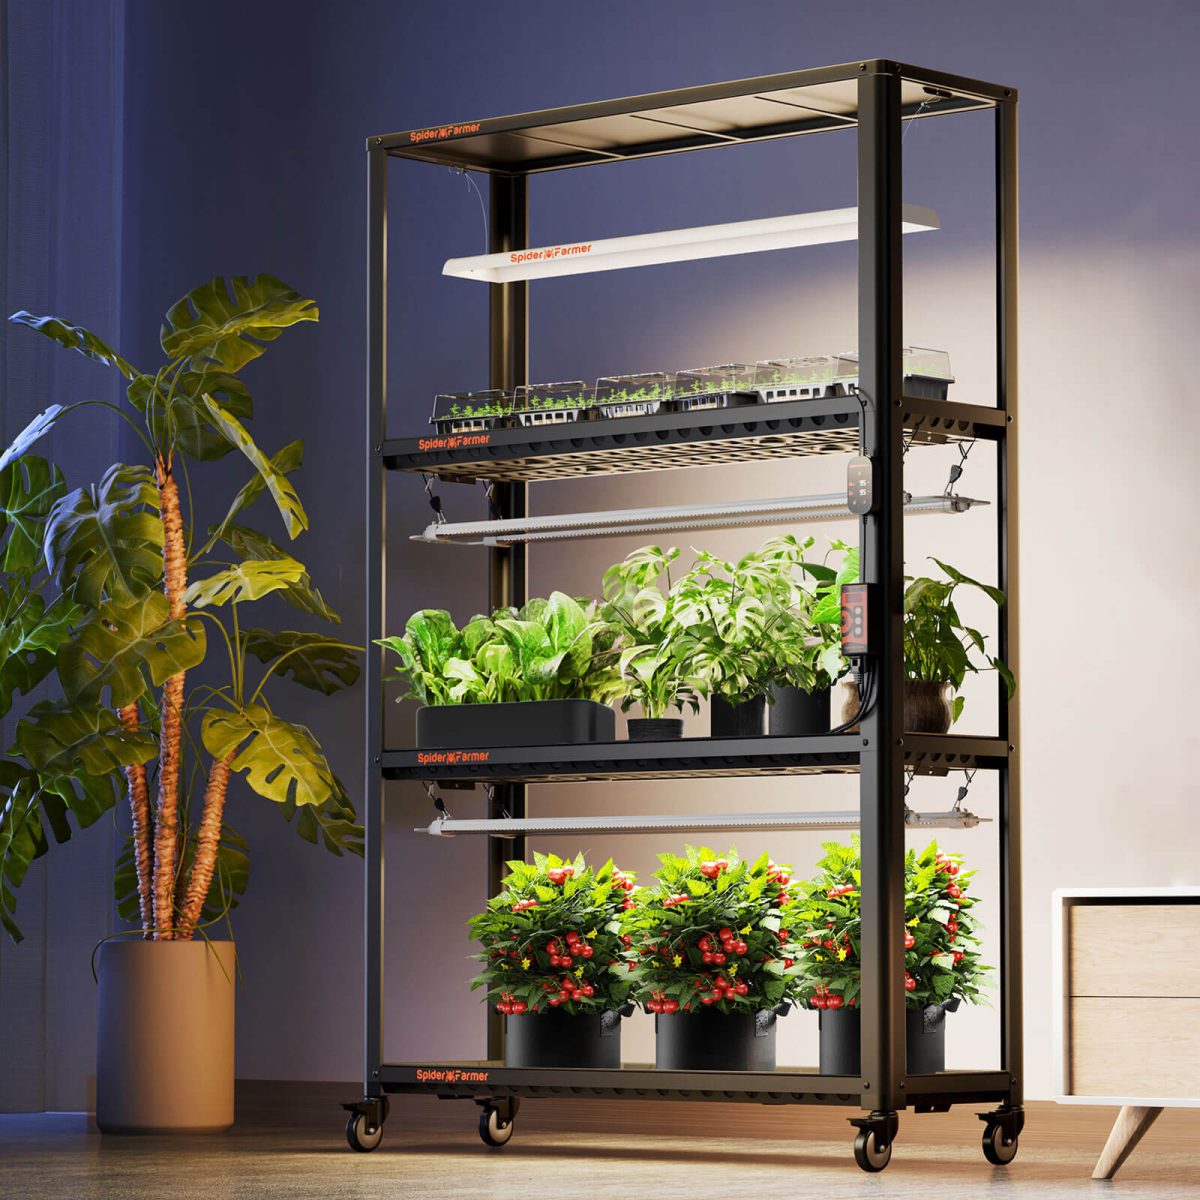 SF Glow80 SF600 + Plant Stand with Plant Trays